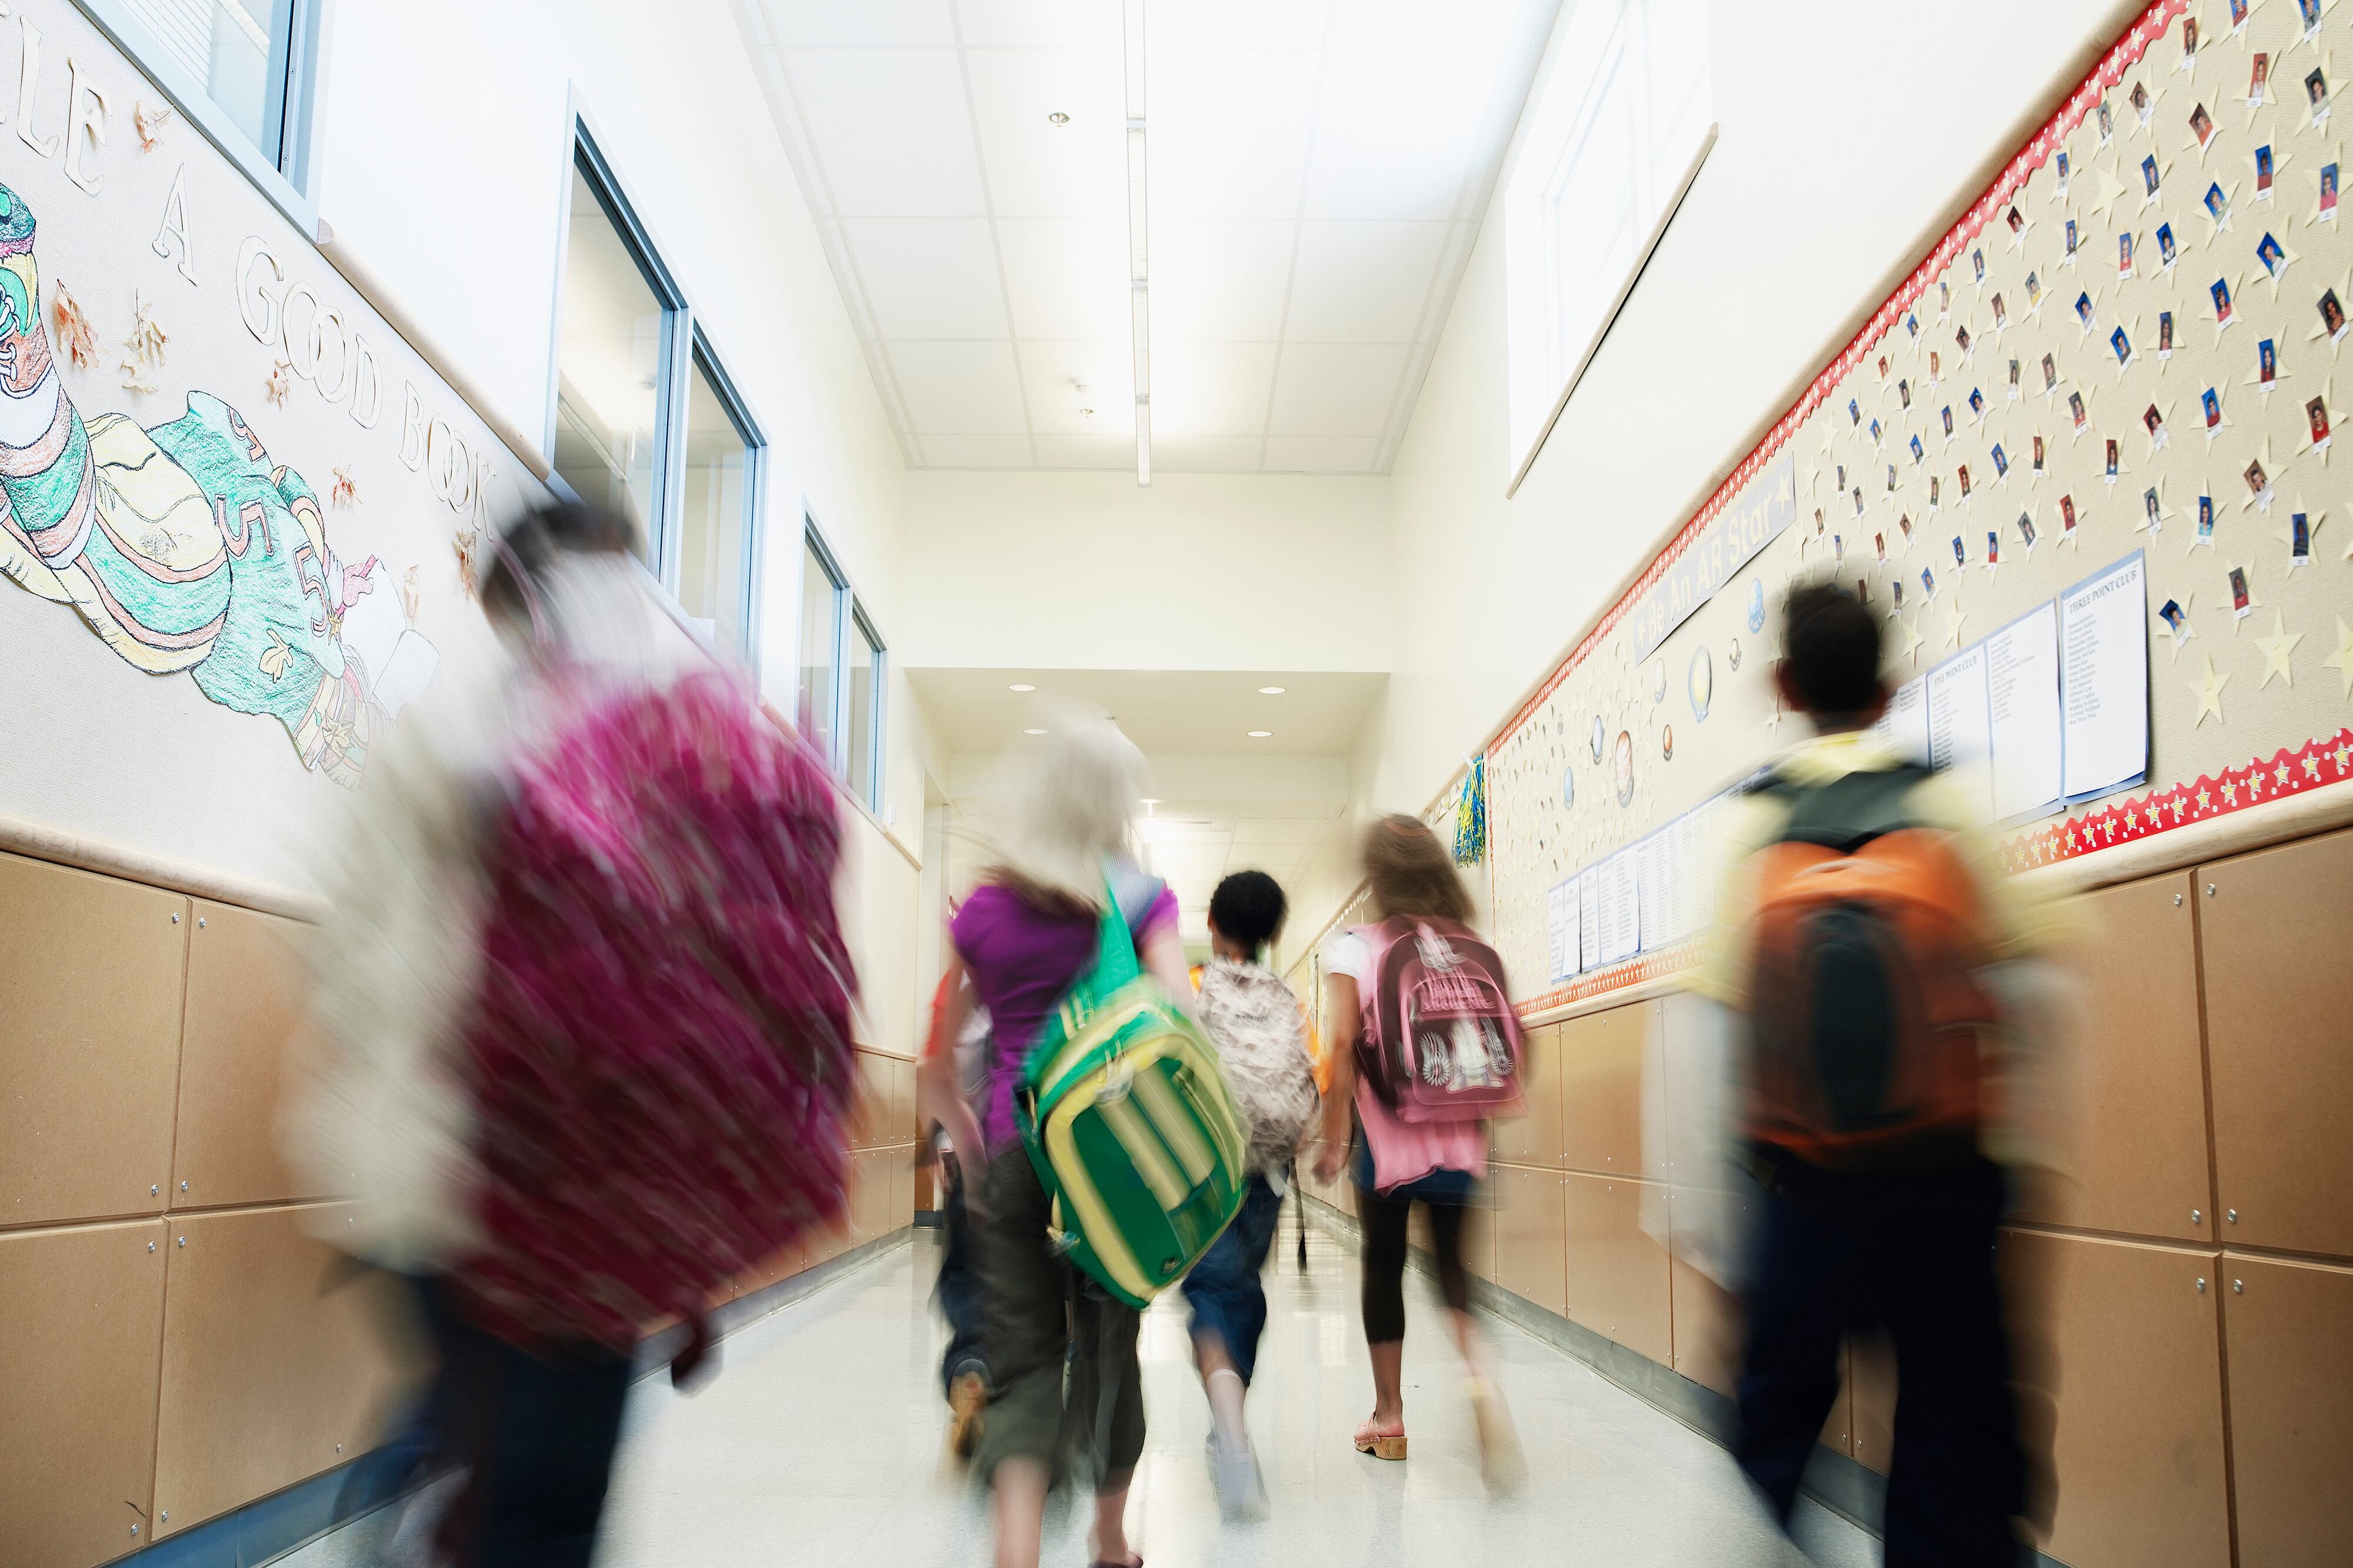 A group of middle school students walk away from the camera in a blurry motion down a school hallway.